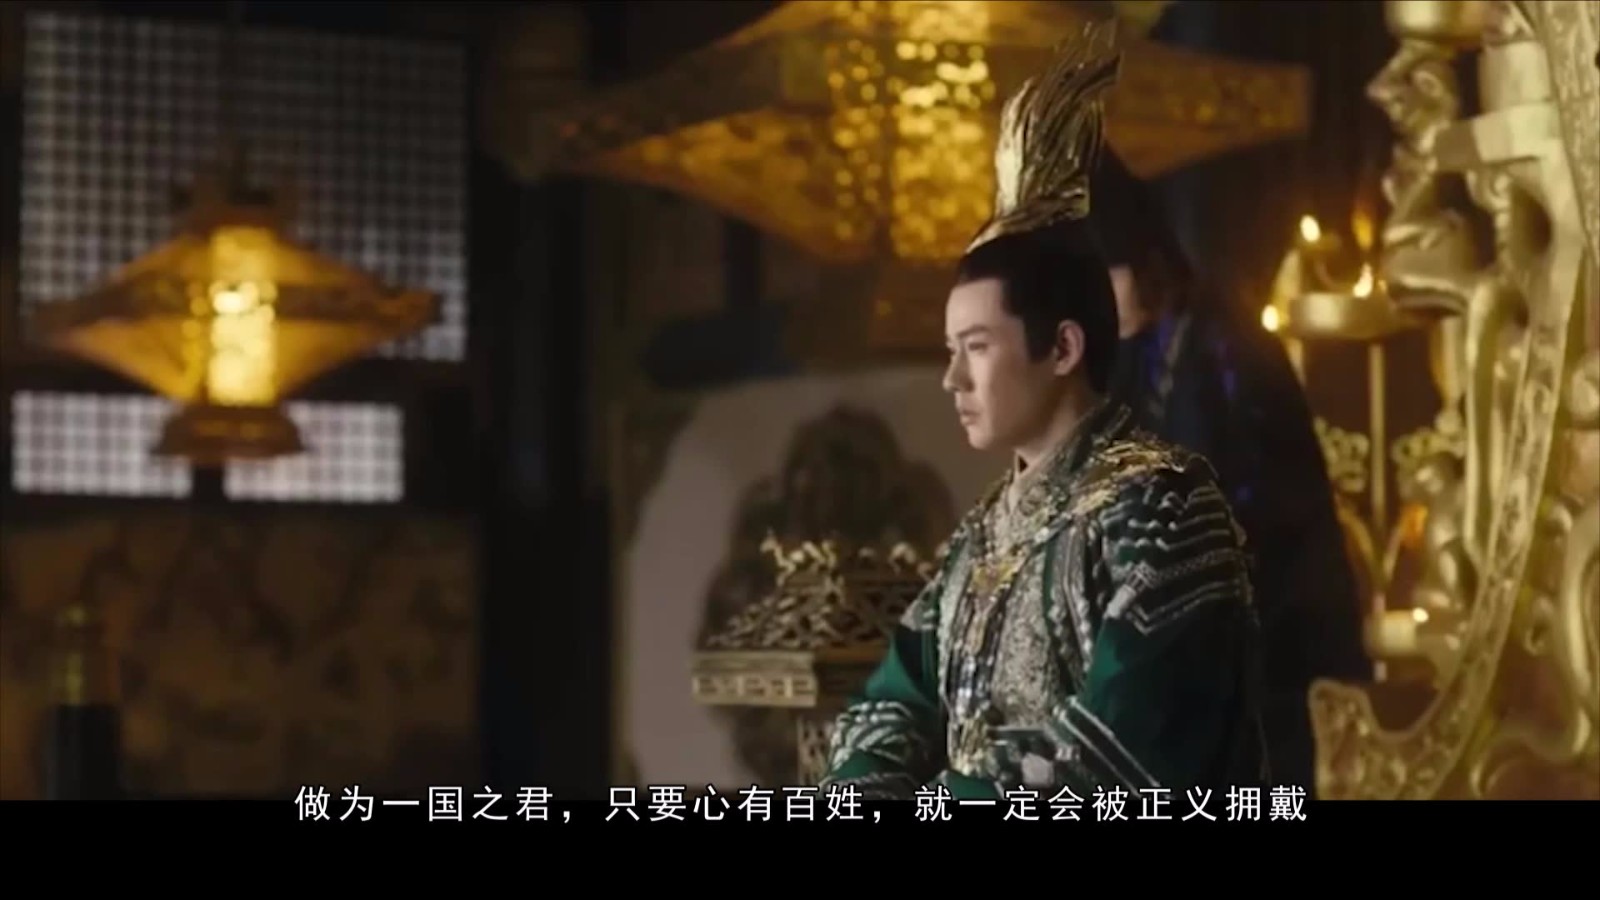 Jiuzhou Fanlu: Don't underestimate the young emperor. He is not an opponent to join hands with him.